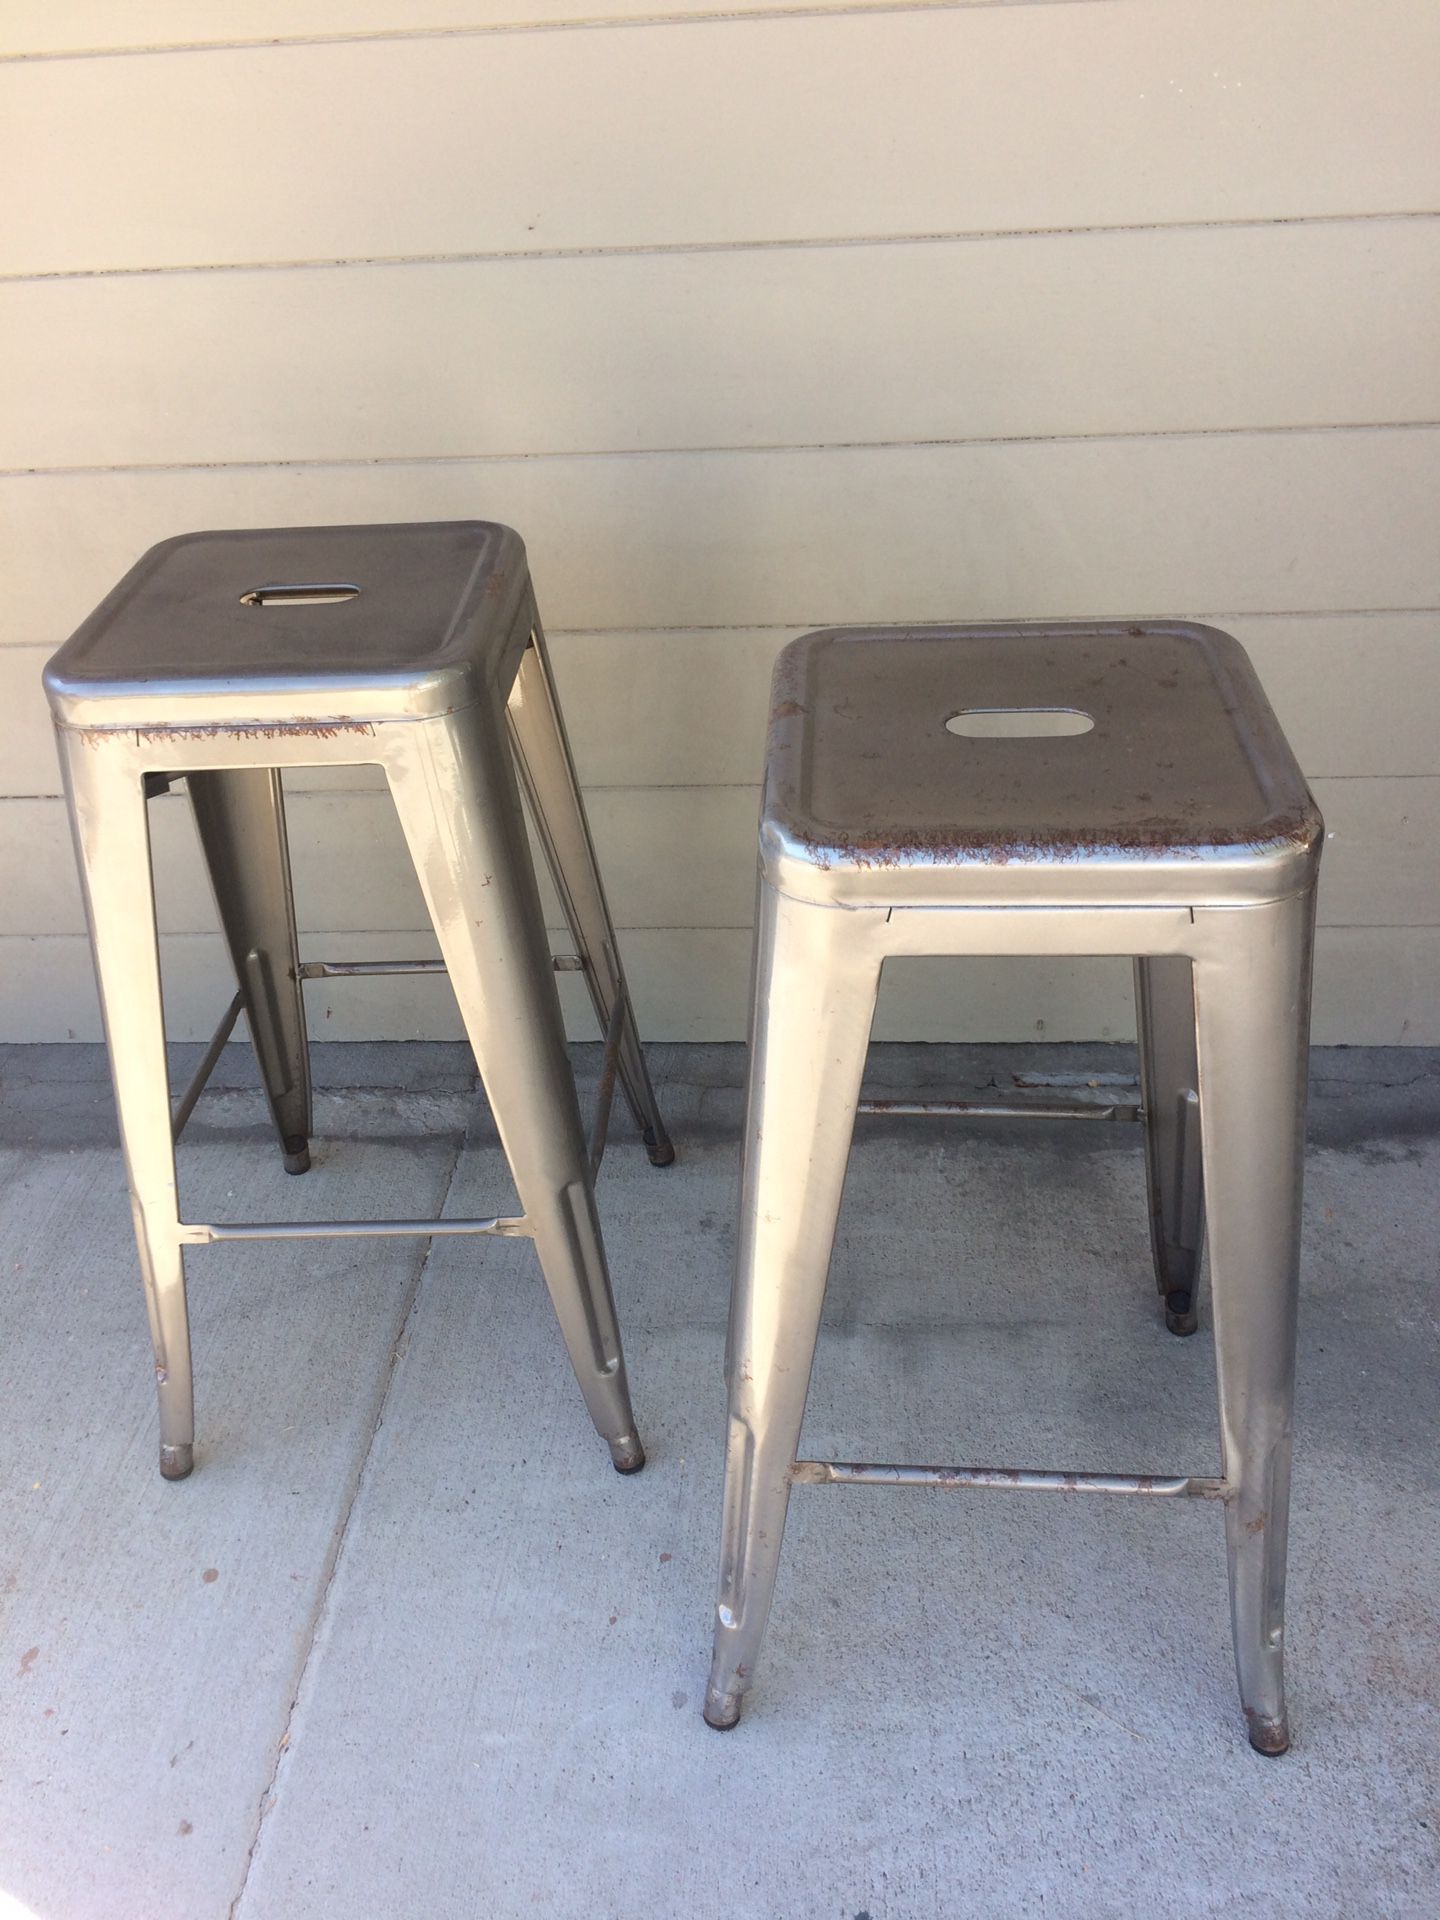 STOOLS - Set of 2. INDUSTRIAL METAL. STACKING. Like New. Non Marking Foot Glides. Pick up in Escondido $20.00 ea